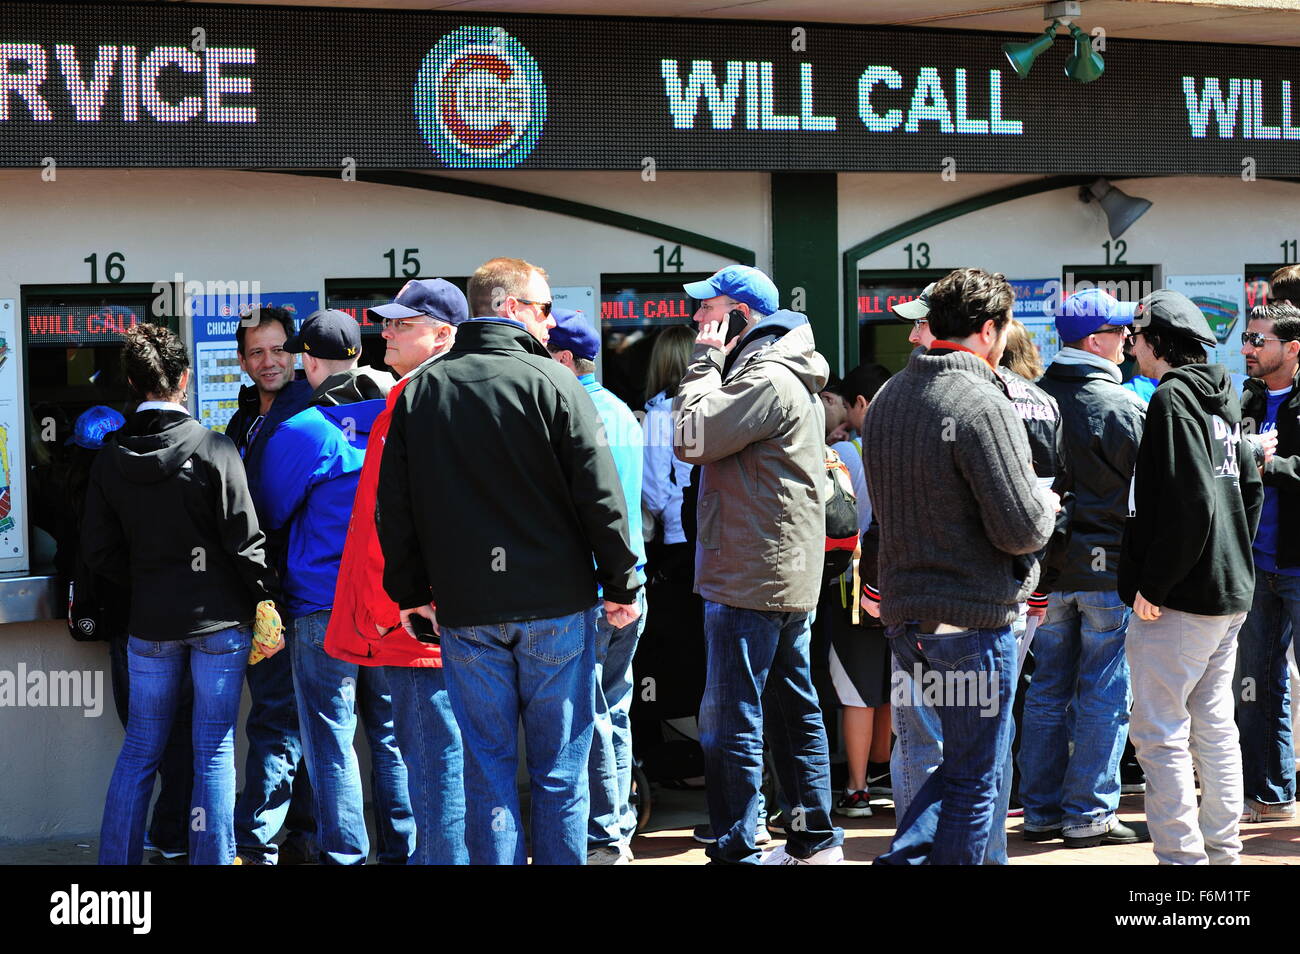 Fans line up to buy or pick up tickets to enter iconic Wrigley Field, home to the Chicago Cubs prior to a baseball game. Chicago, Illinois, USA. Stock Photo